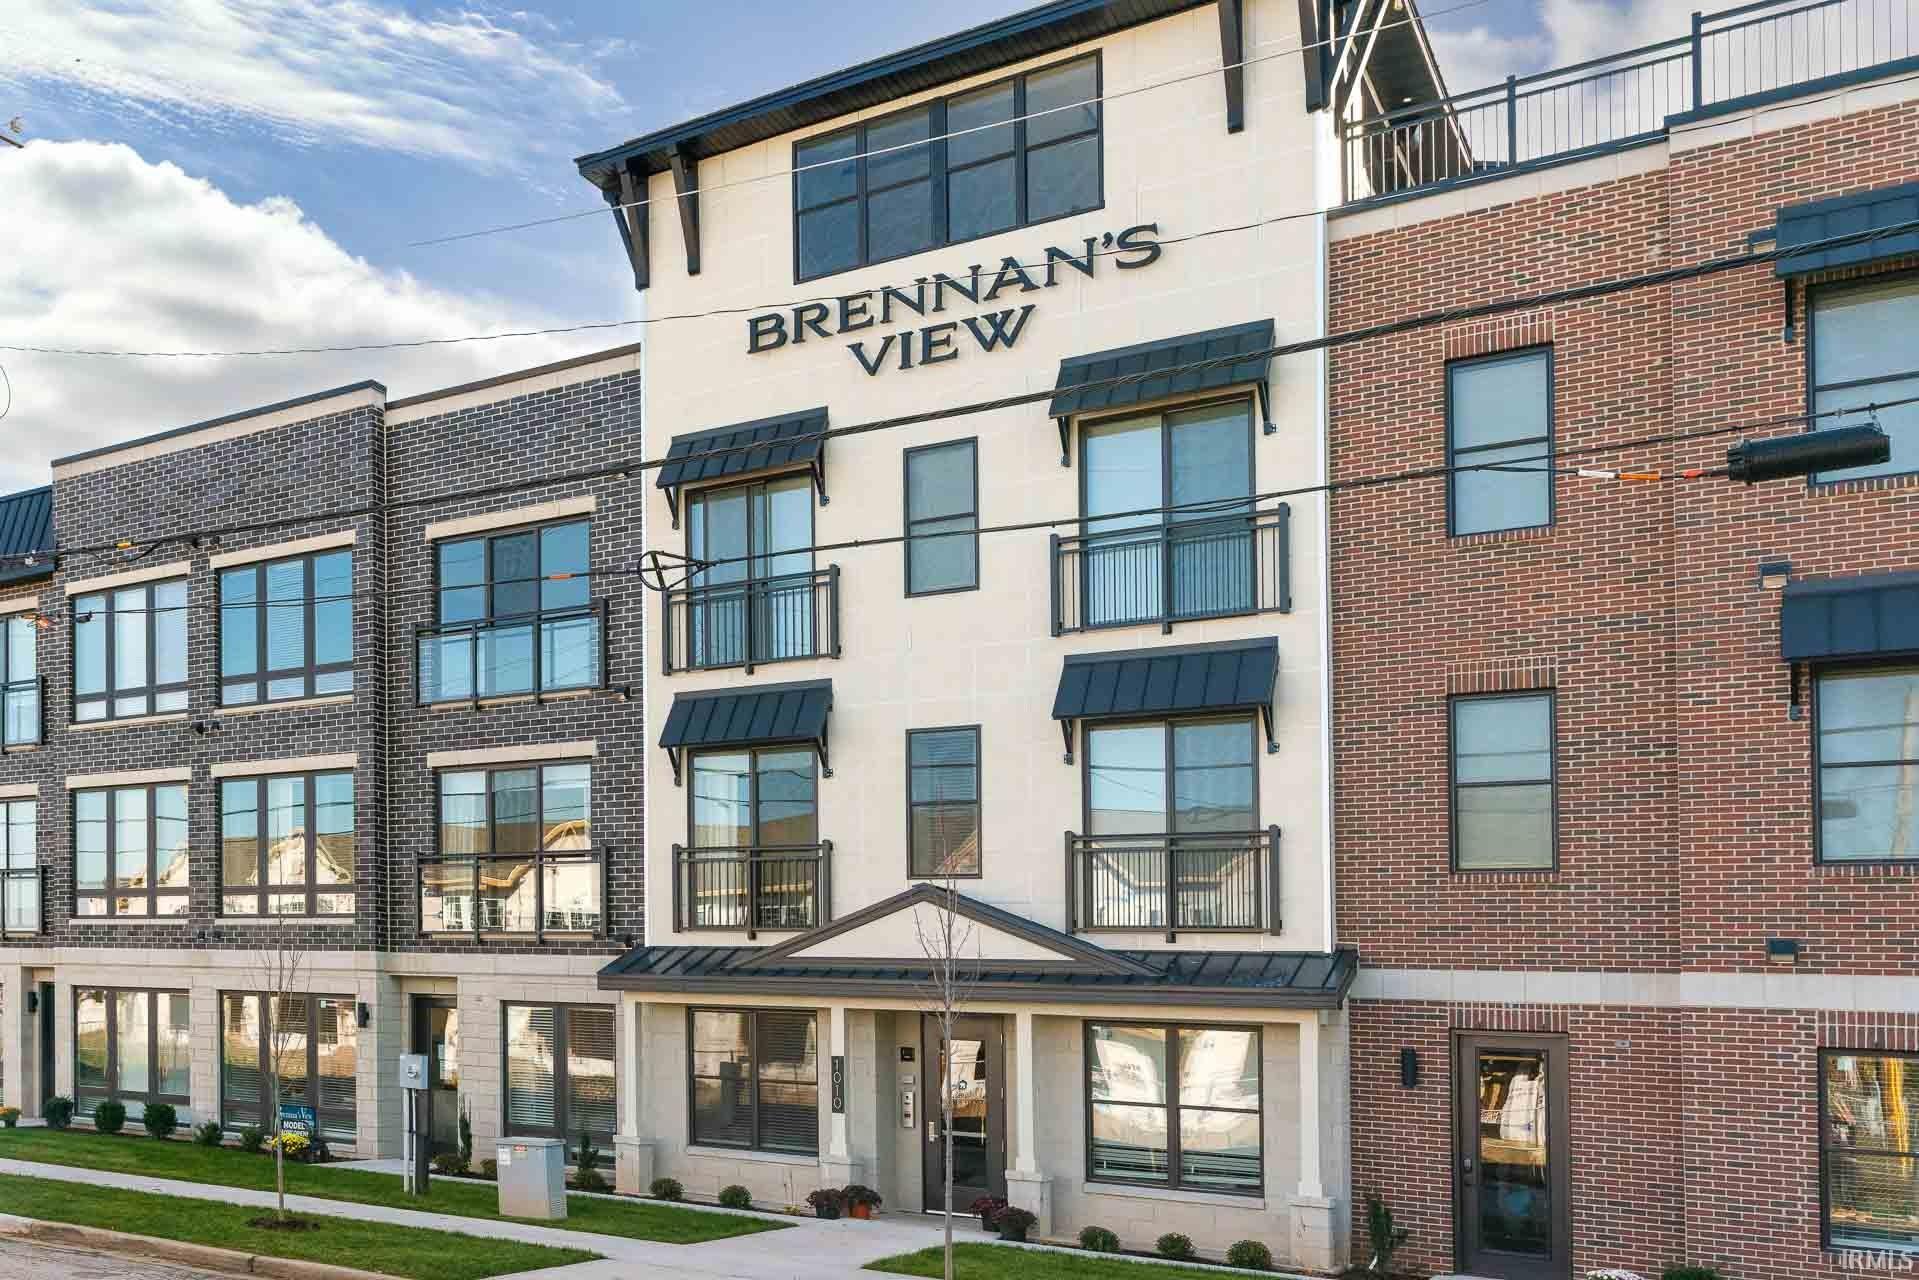 1010 Corby Unit 109 Boulevard Unit 109 Brennans View, South Bend, IN 46617